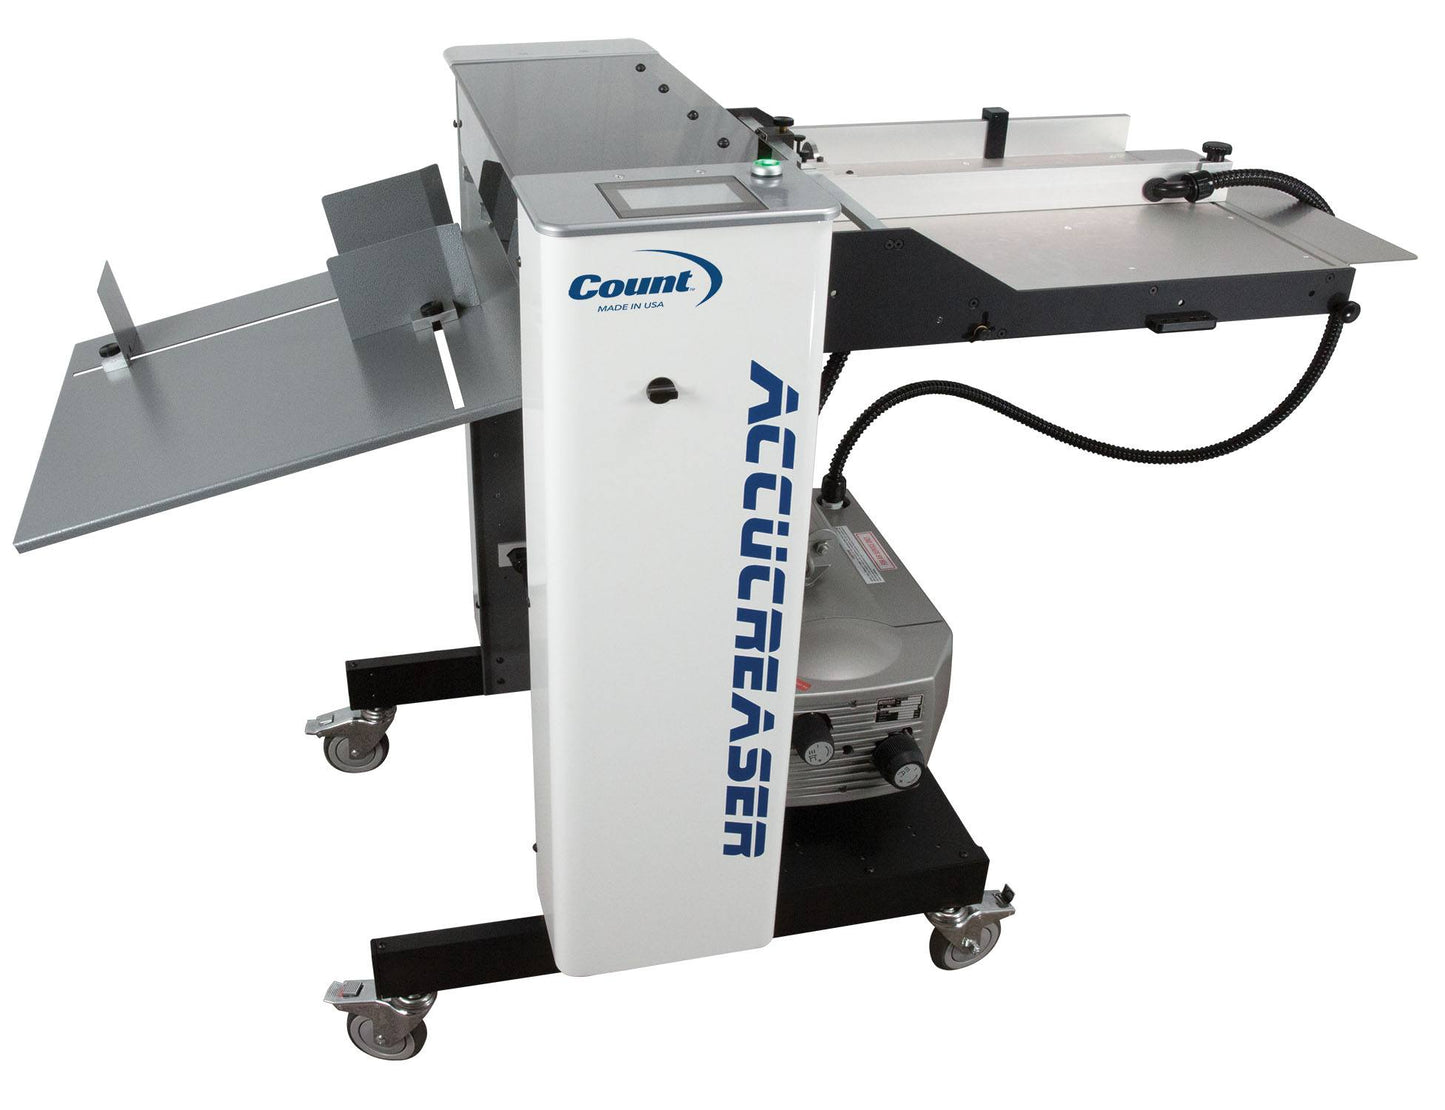 Count Accucreaser Air Touch 18" Creasing Machine